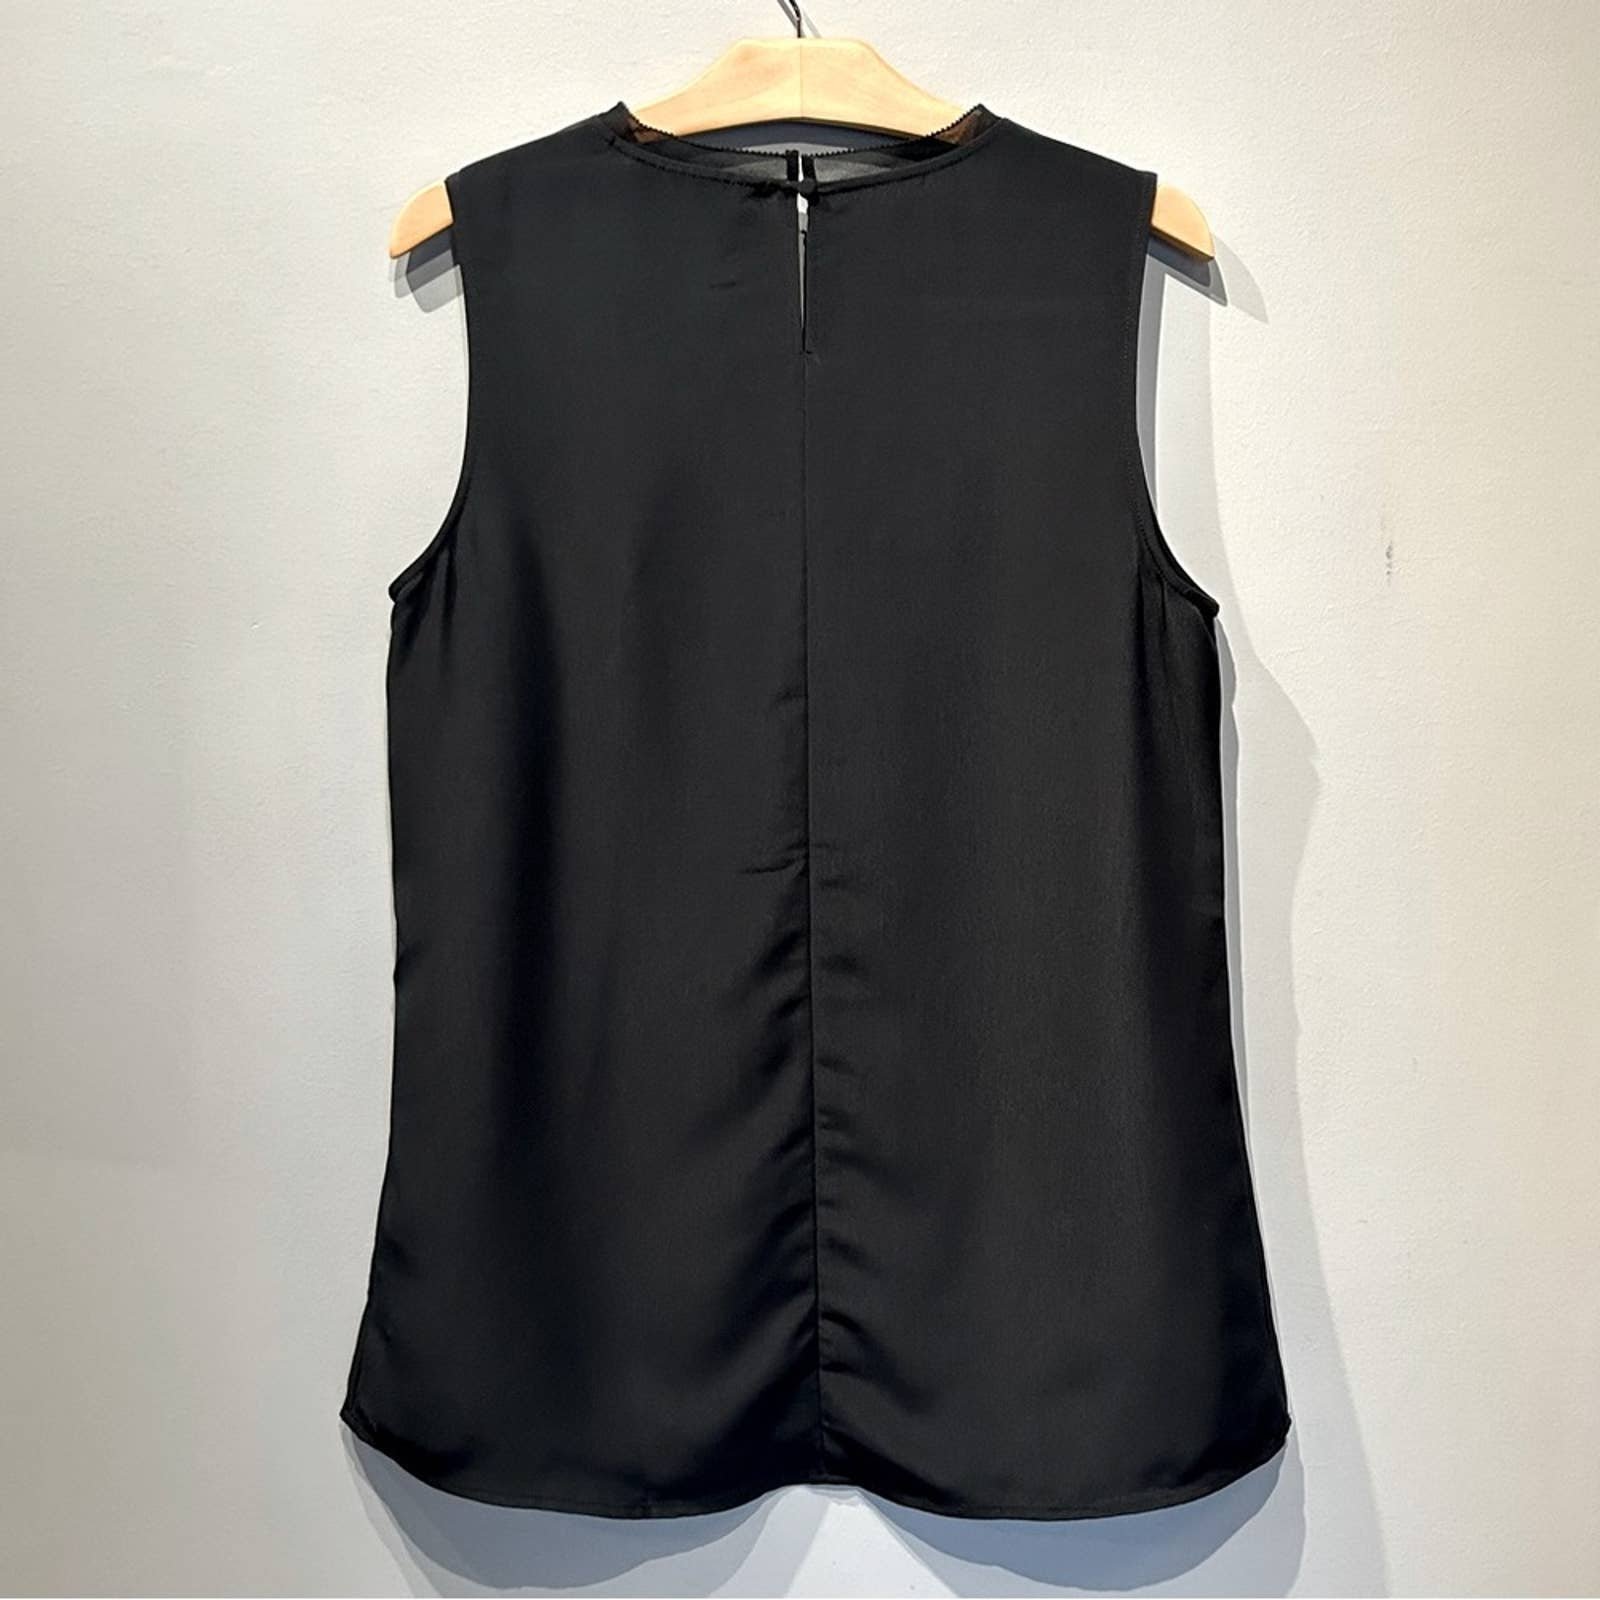 Gorgeous NWT Soft Surroundings Caranday Tank in Black mWGgyS5Wh Great